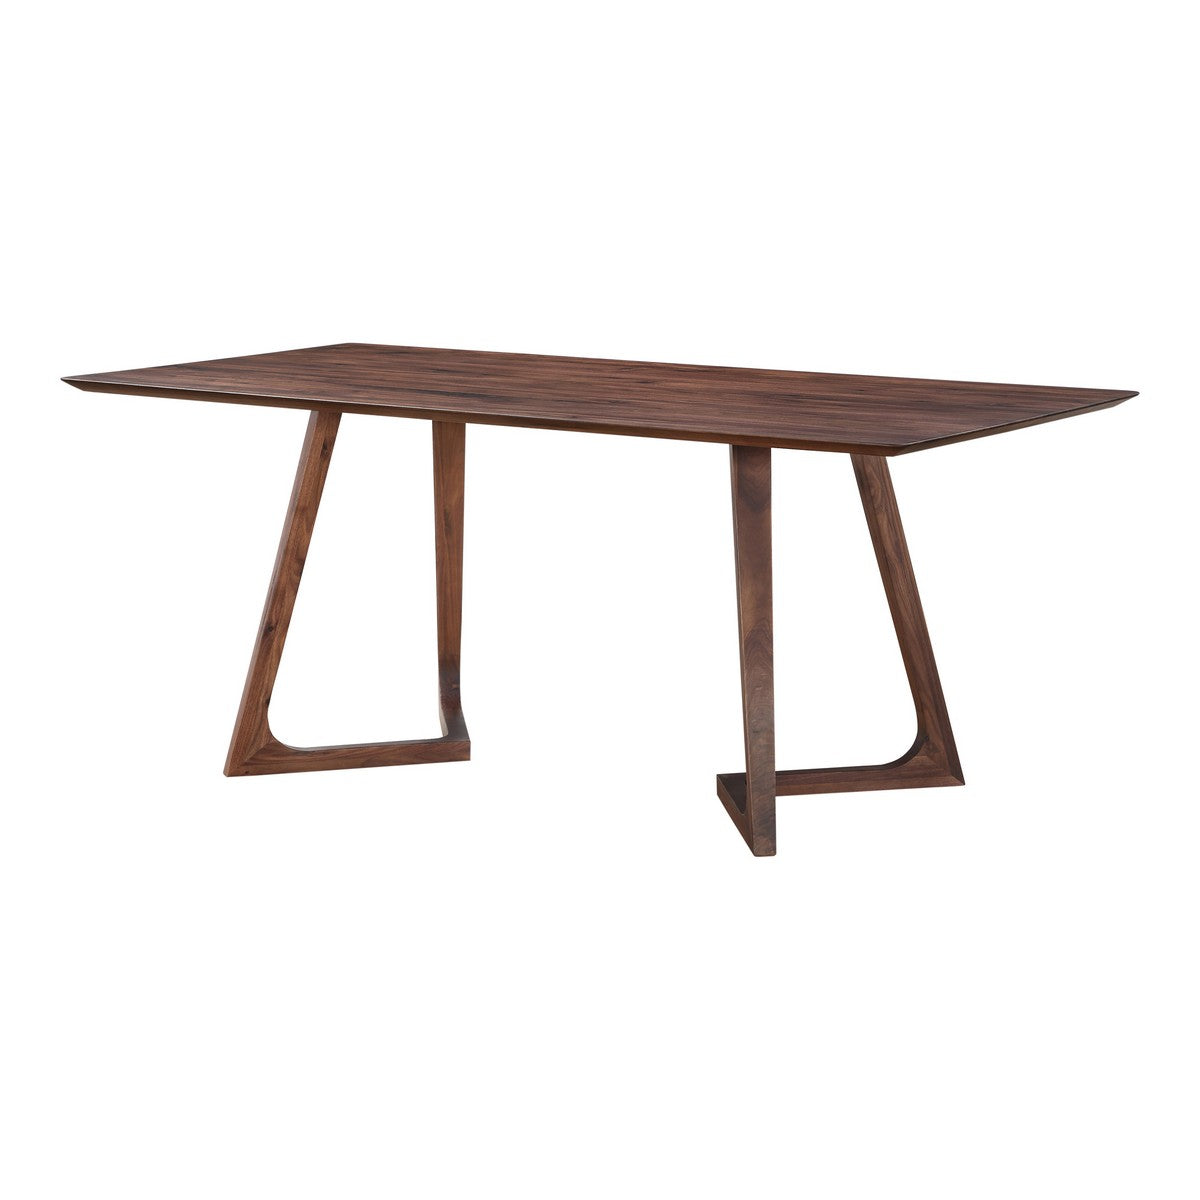 Moe's Home Collection Godenza Dining Table Rectangular Walnut - CB-1004-03